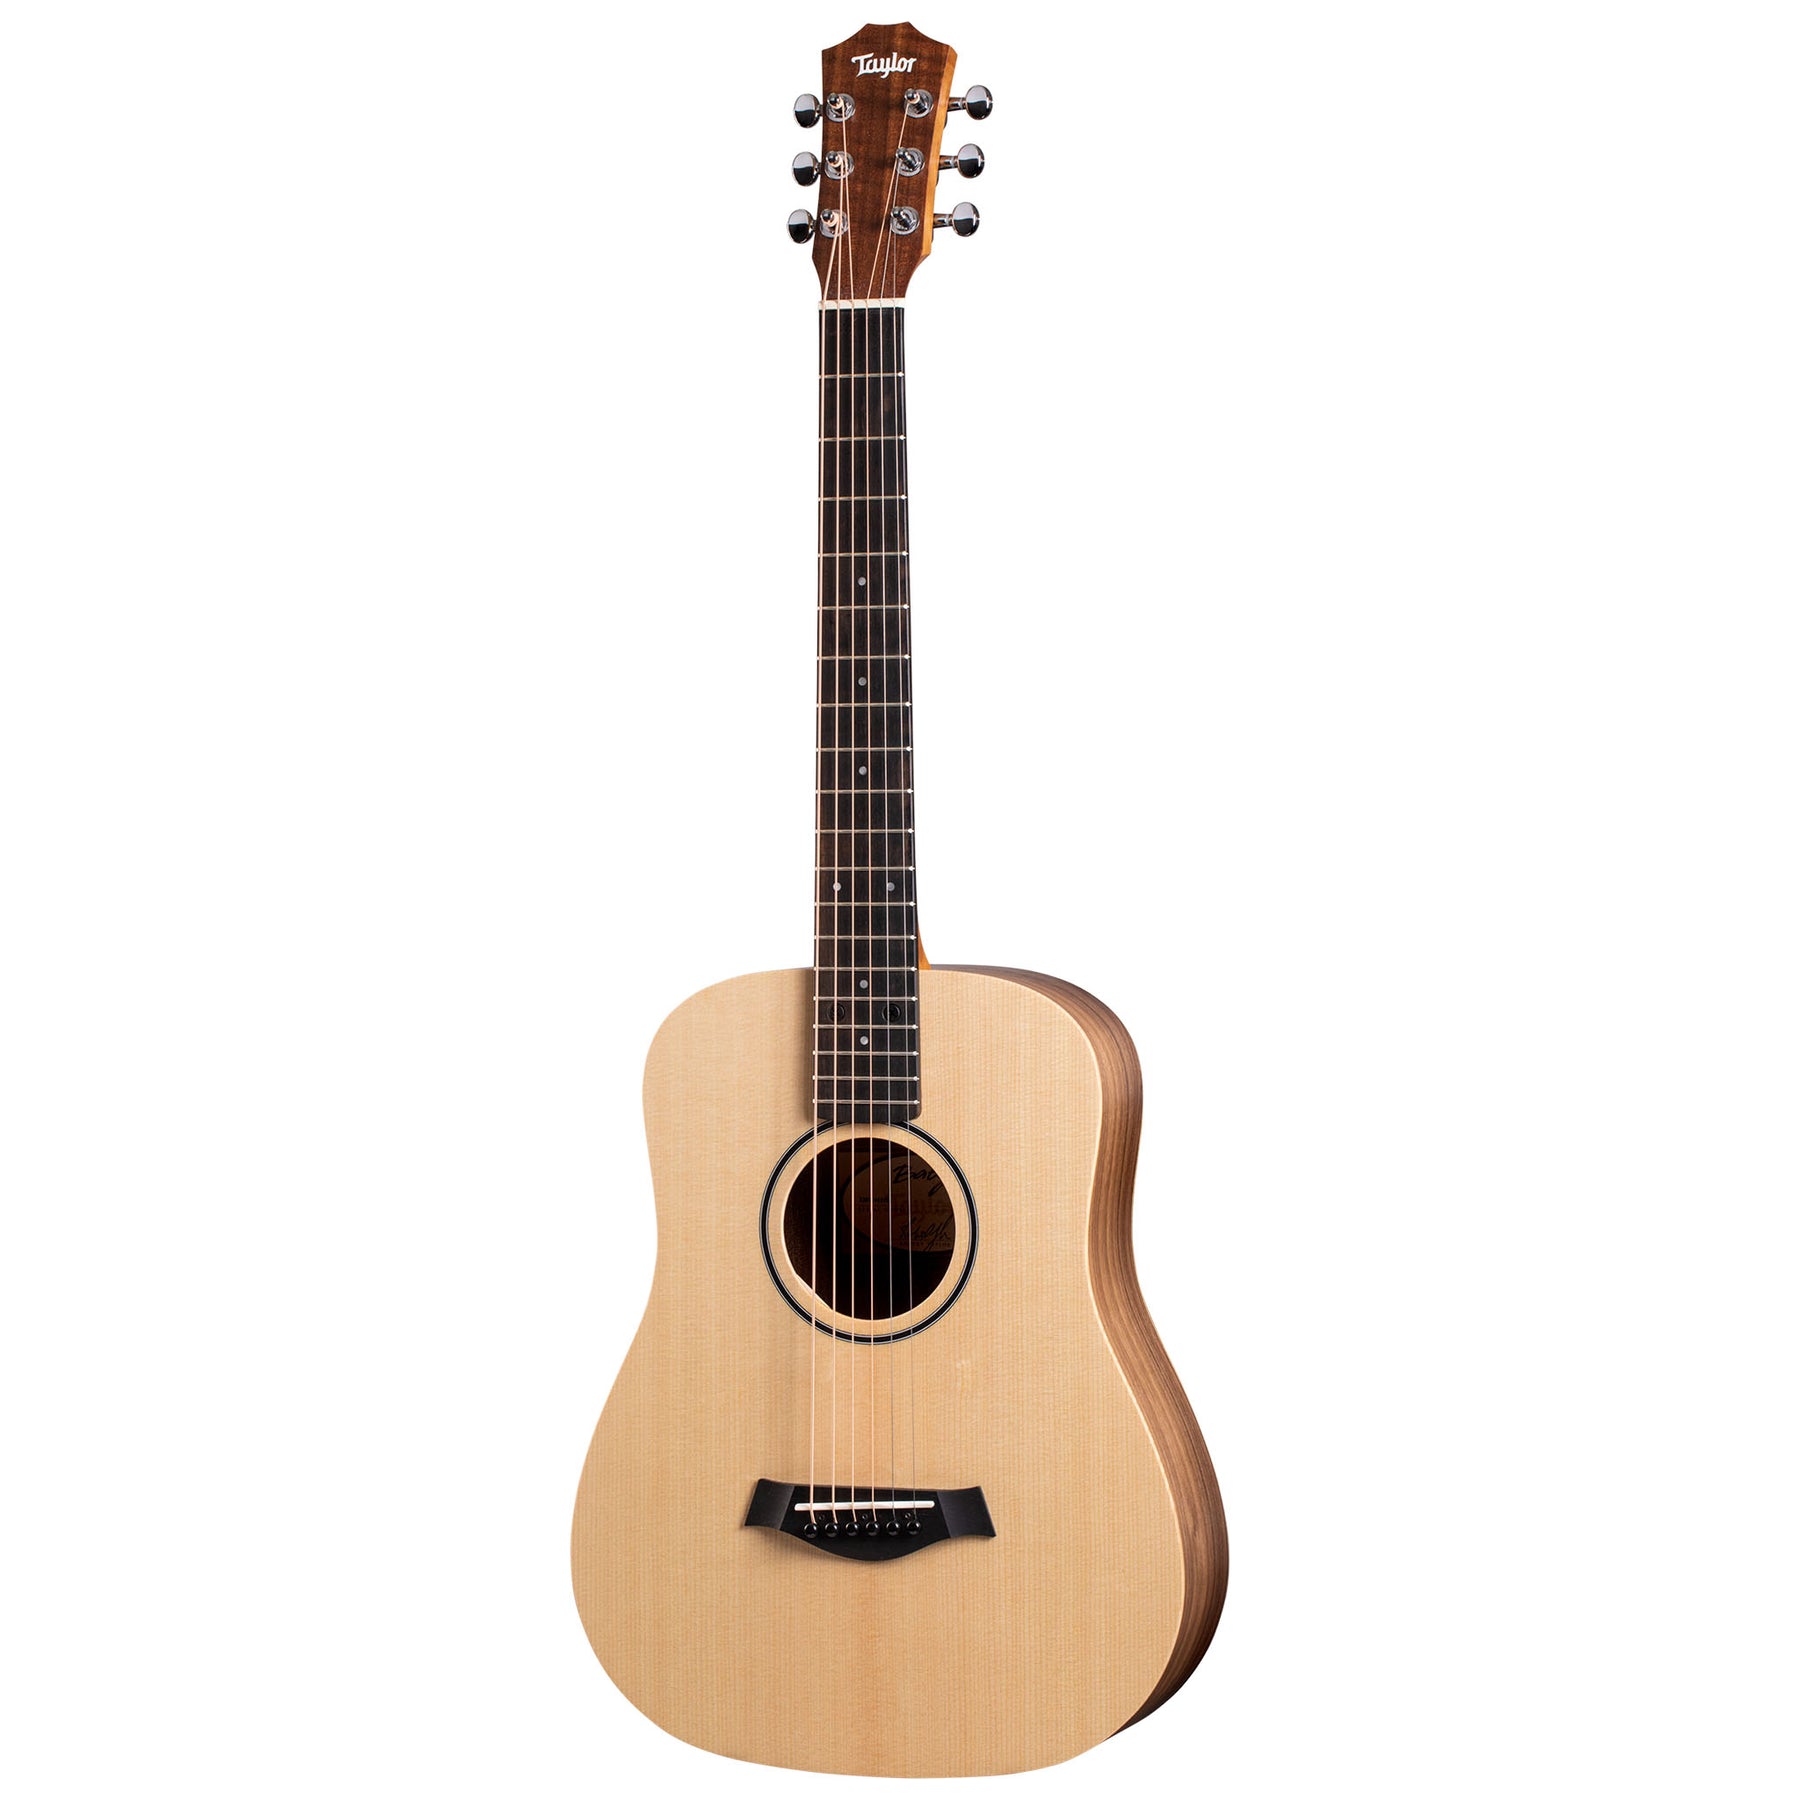 Taylor Baby Taylor BT1 Layered Walnut Acoustic Guitar